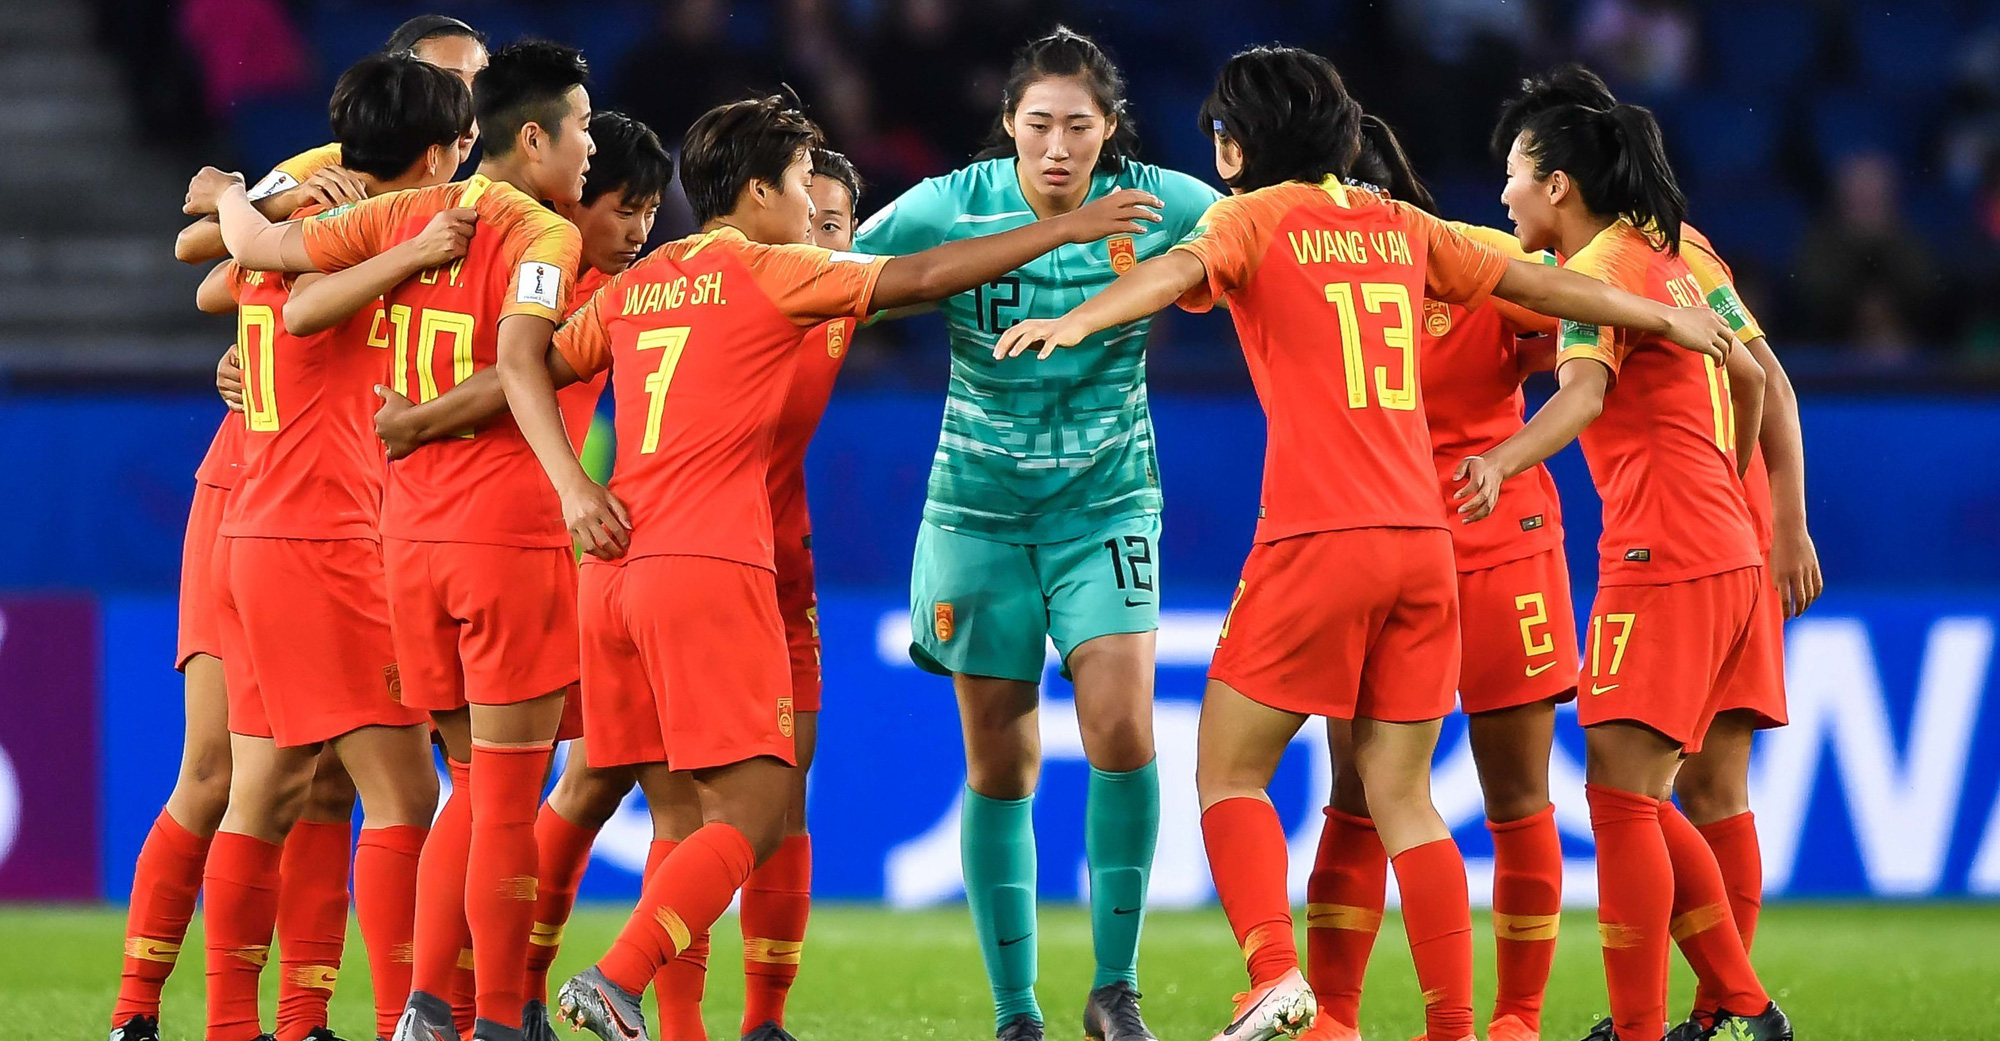 FIFA Women’s World Cup is Back – But Does Anyone Care?